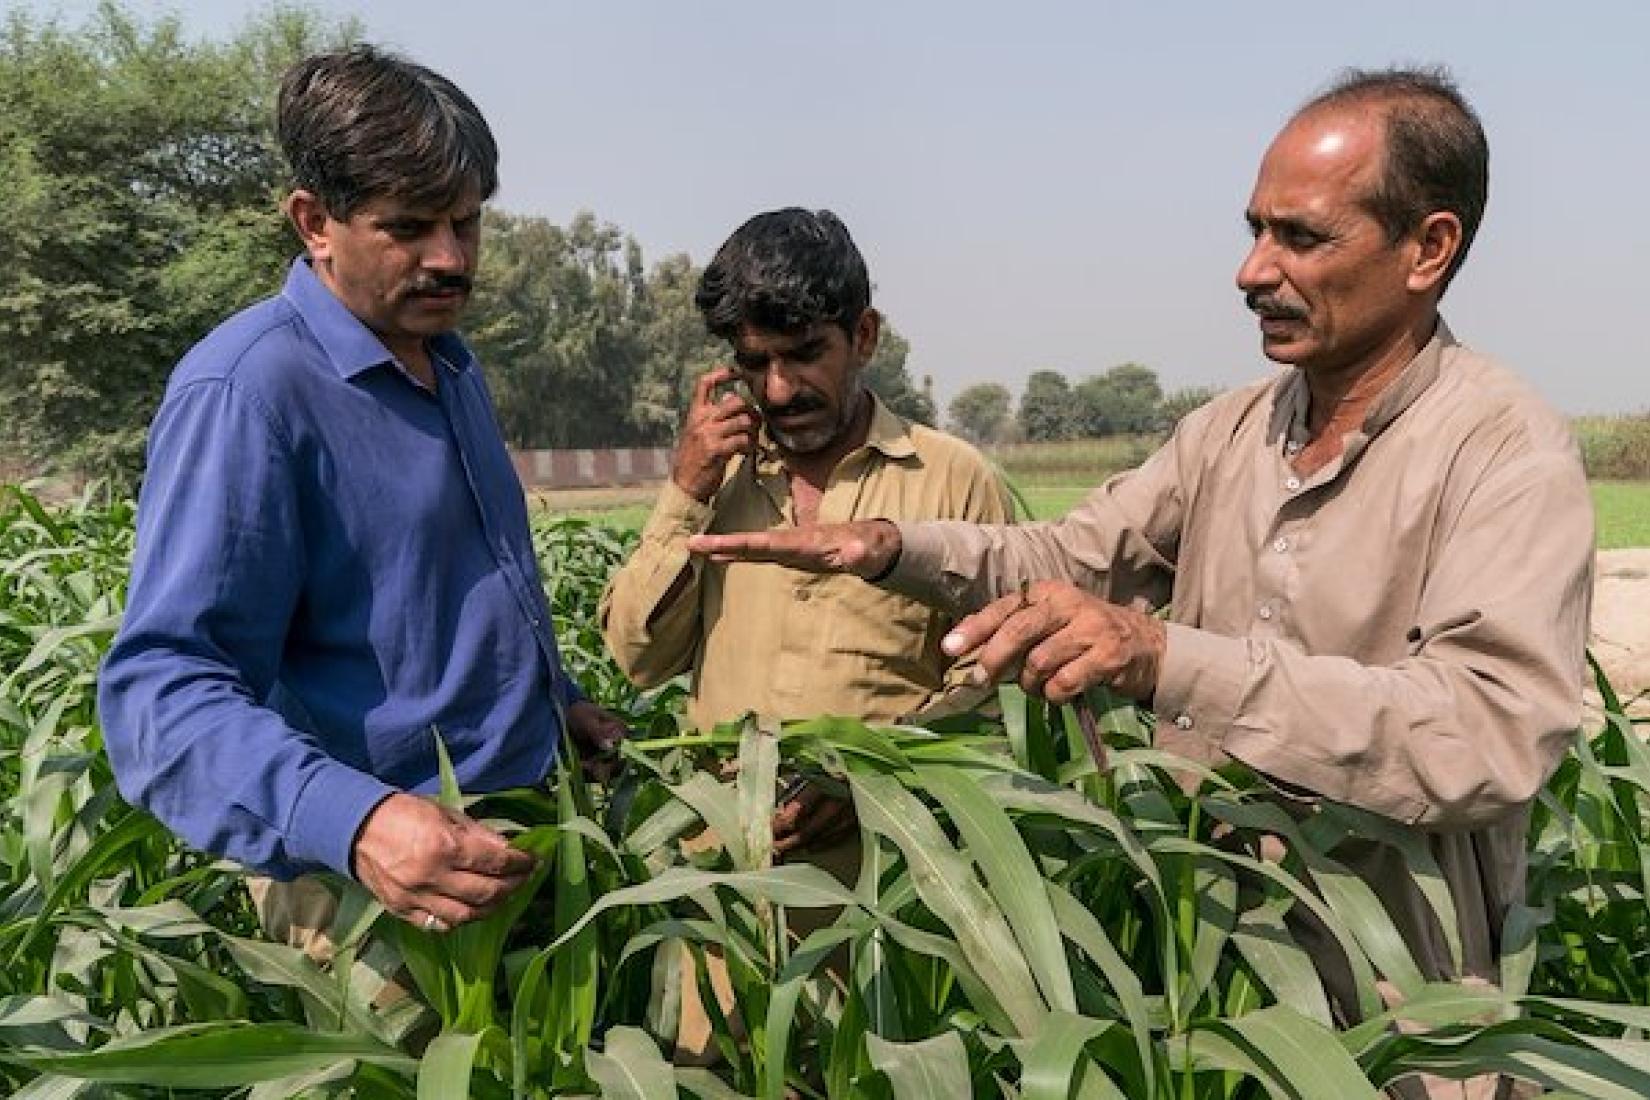 Dr Hassan Warriach from University of Veterinary and Animal Sciences (UVAS) talks with farmer Khadim Hussain (centre) and another farmer from village 83D in district Pakpattan of Pakistan about crops for livestock. Image: ACIAR/Conor Ashleigh